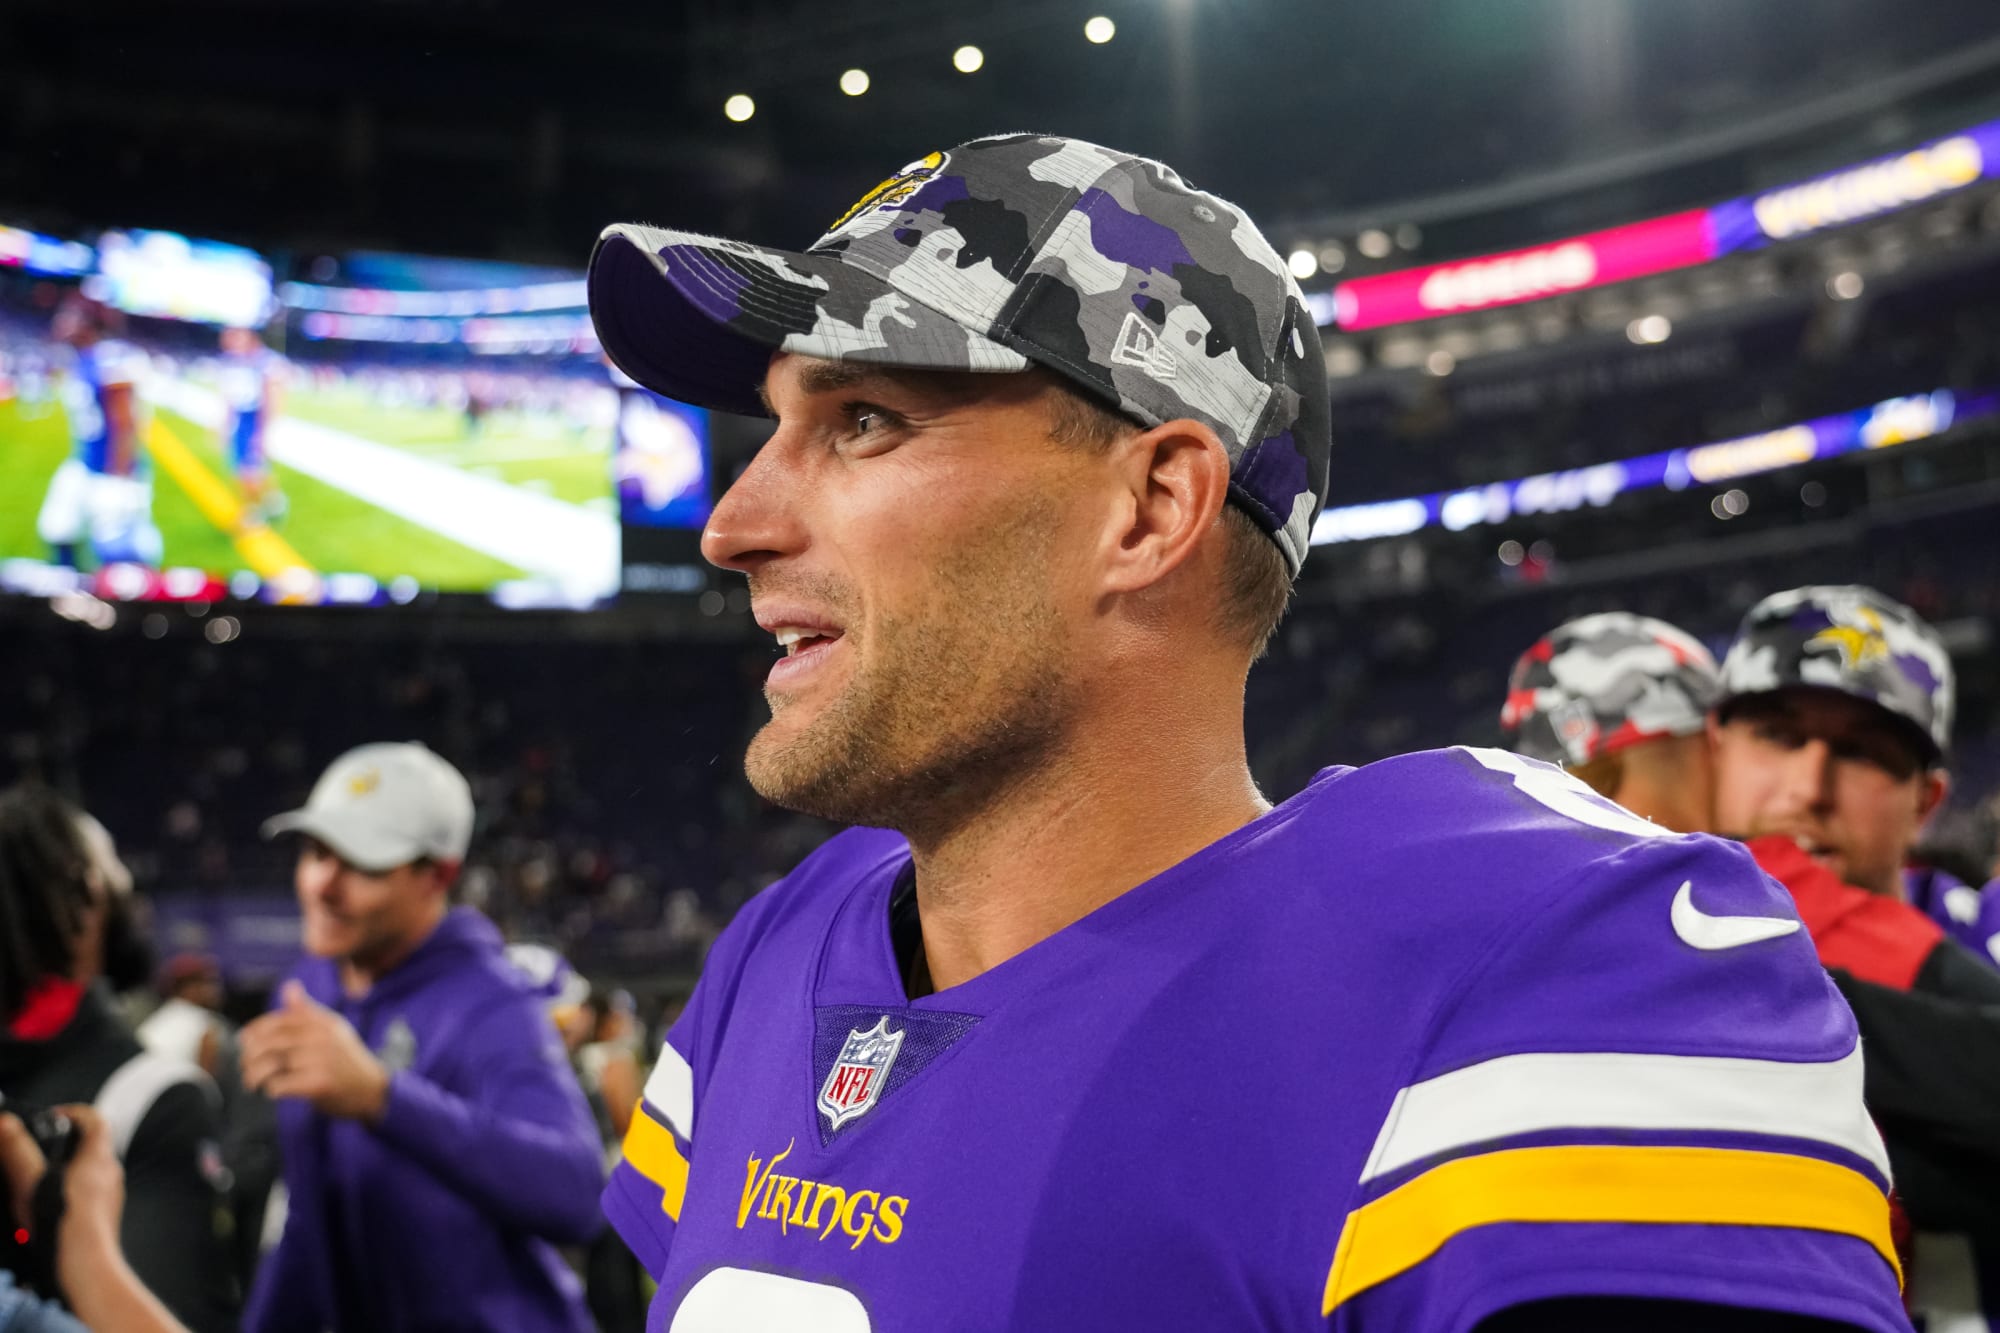 Vikings fans better hope Kirk Cousins doesn’t get injured or traded away